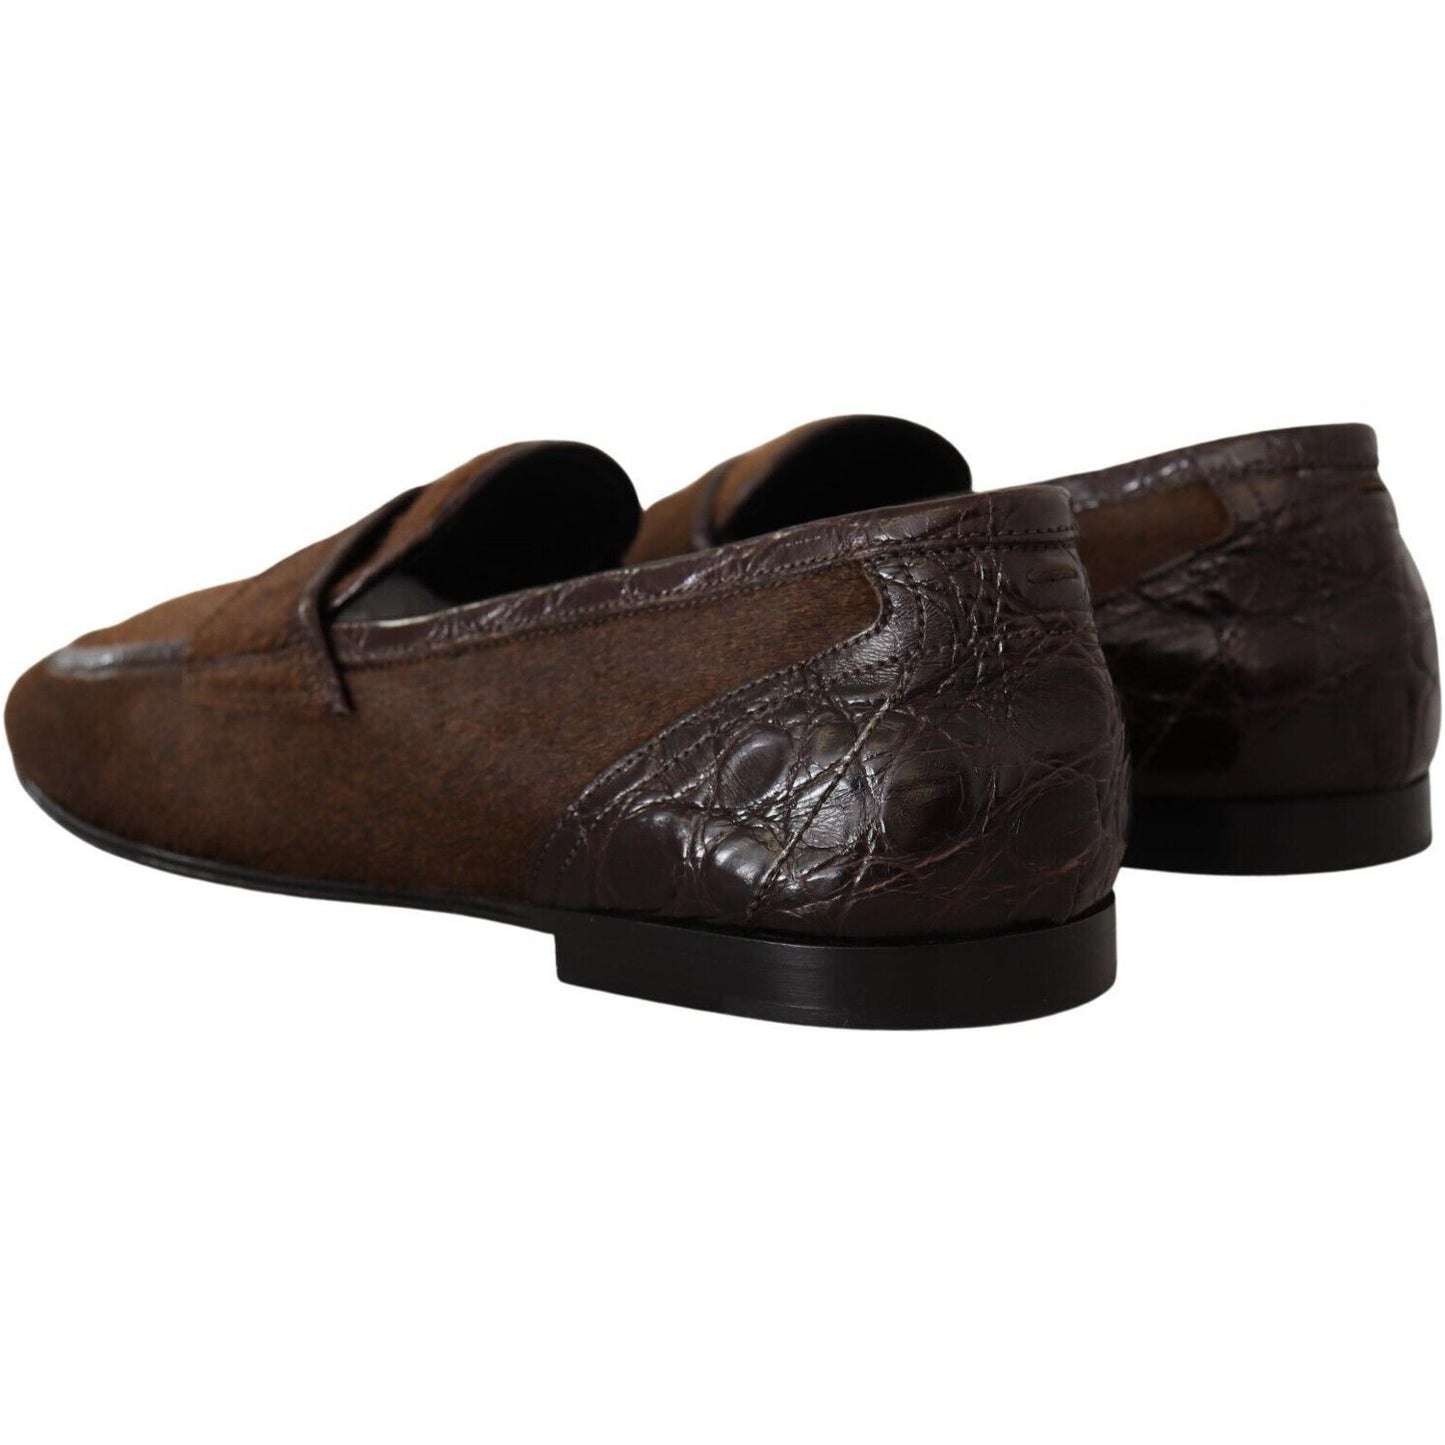 Dolce & Gabbana Exquisite Exotic Leather Loafers brown-exotic-leather-mens-slip-on-loafers-shoes s-l1600-18-7-3018c404-e43.jpg